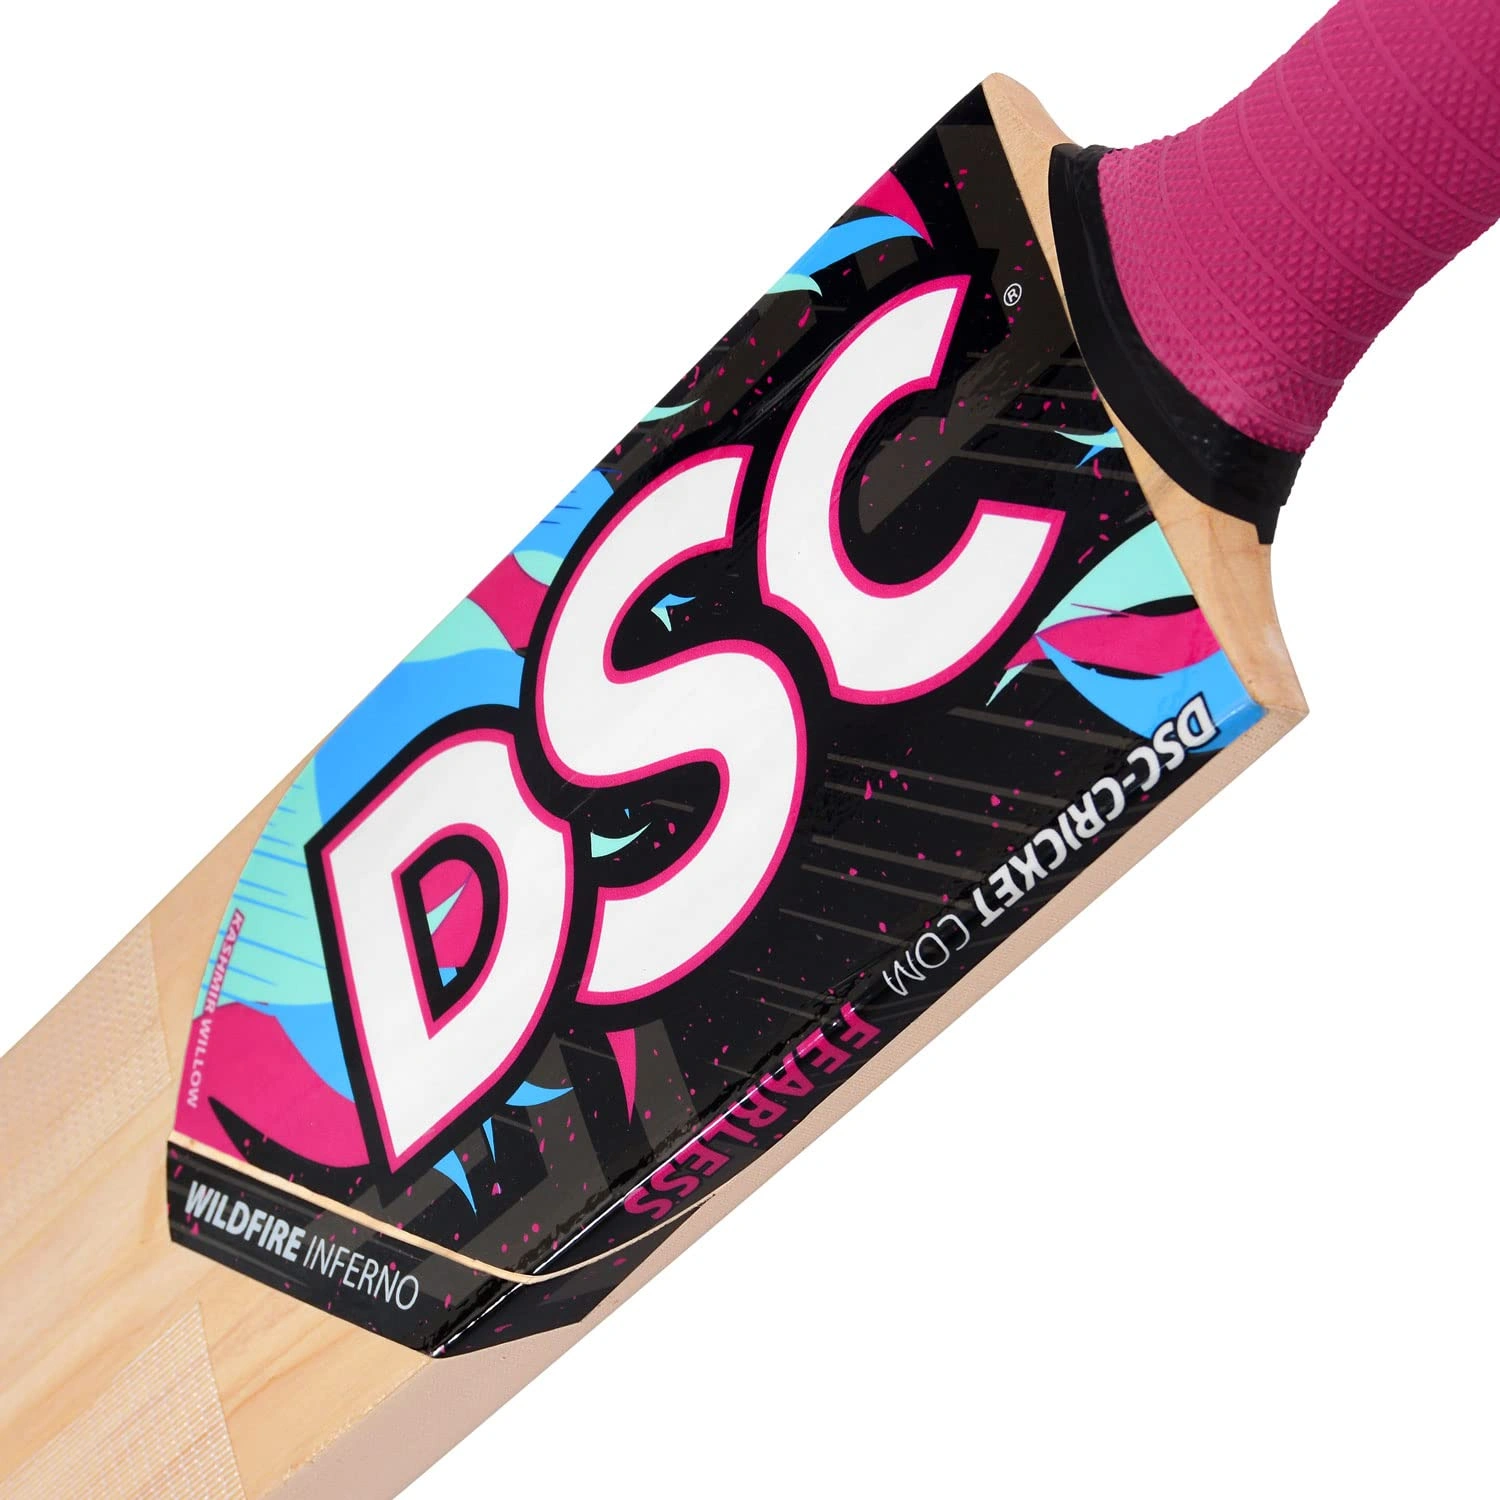 DSC WildFire Inferno Kashmir Willow Cricket Bat for Tennis Ball Cricket: Lightweight and Powerful for Dynamic Play-FS-3